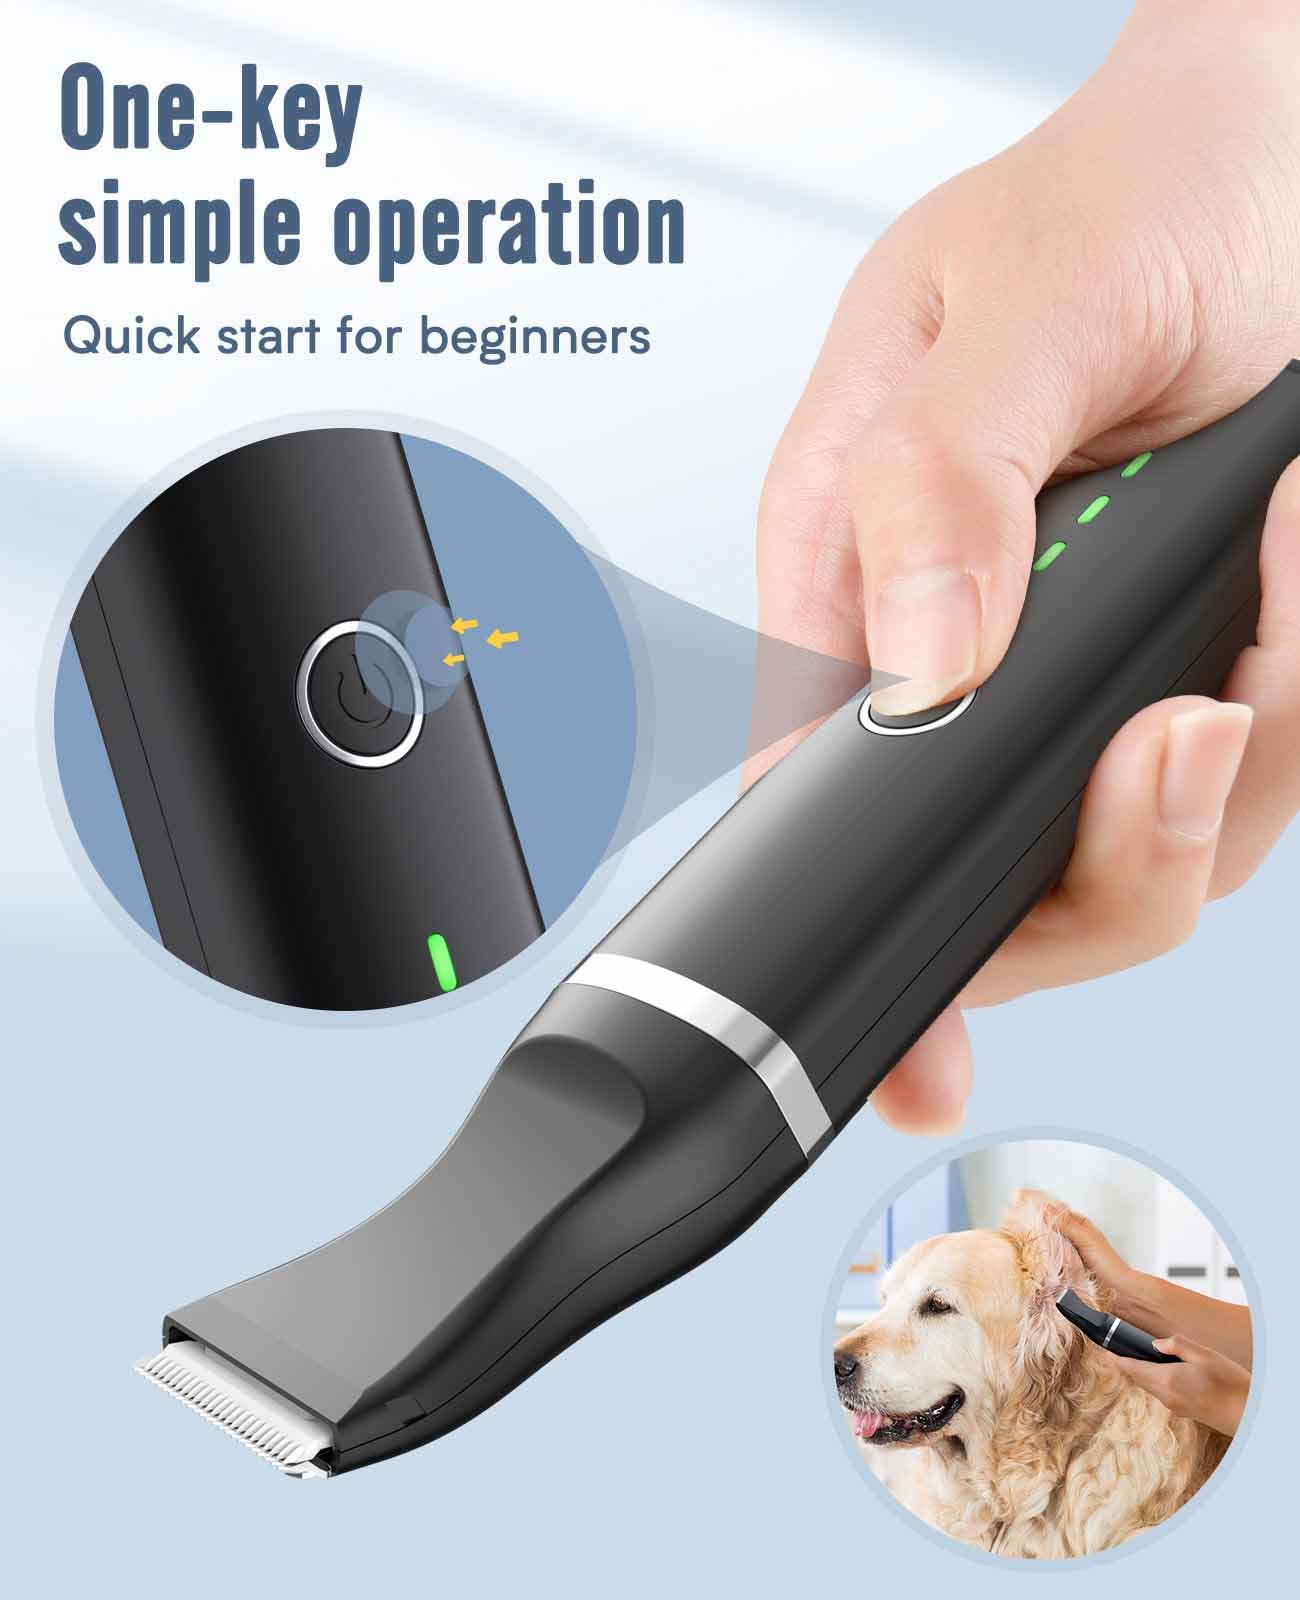 
                  
                    N6 - Oneisall Dog Clippers & Paw Trimmer
                  
                